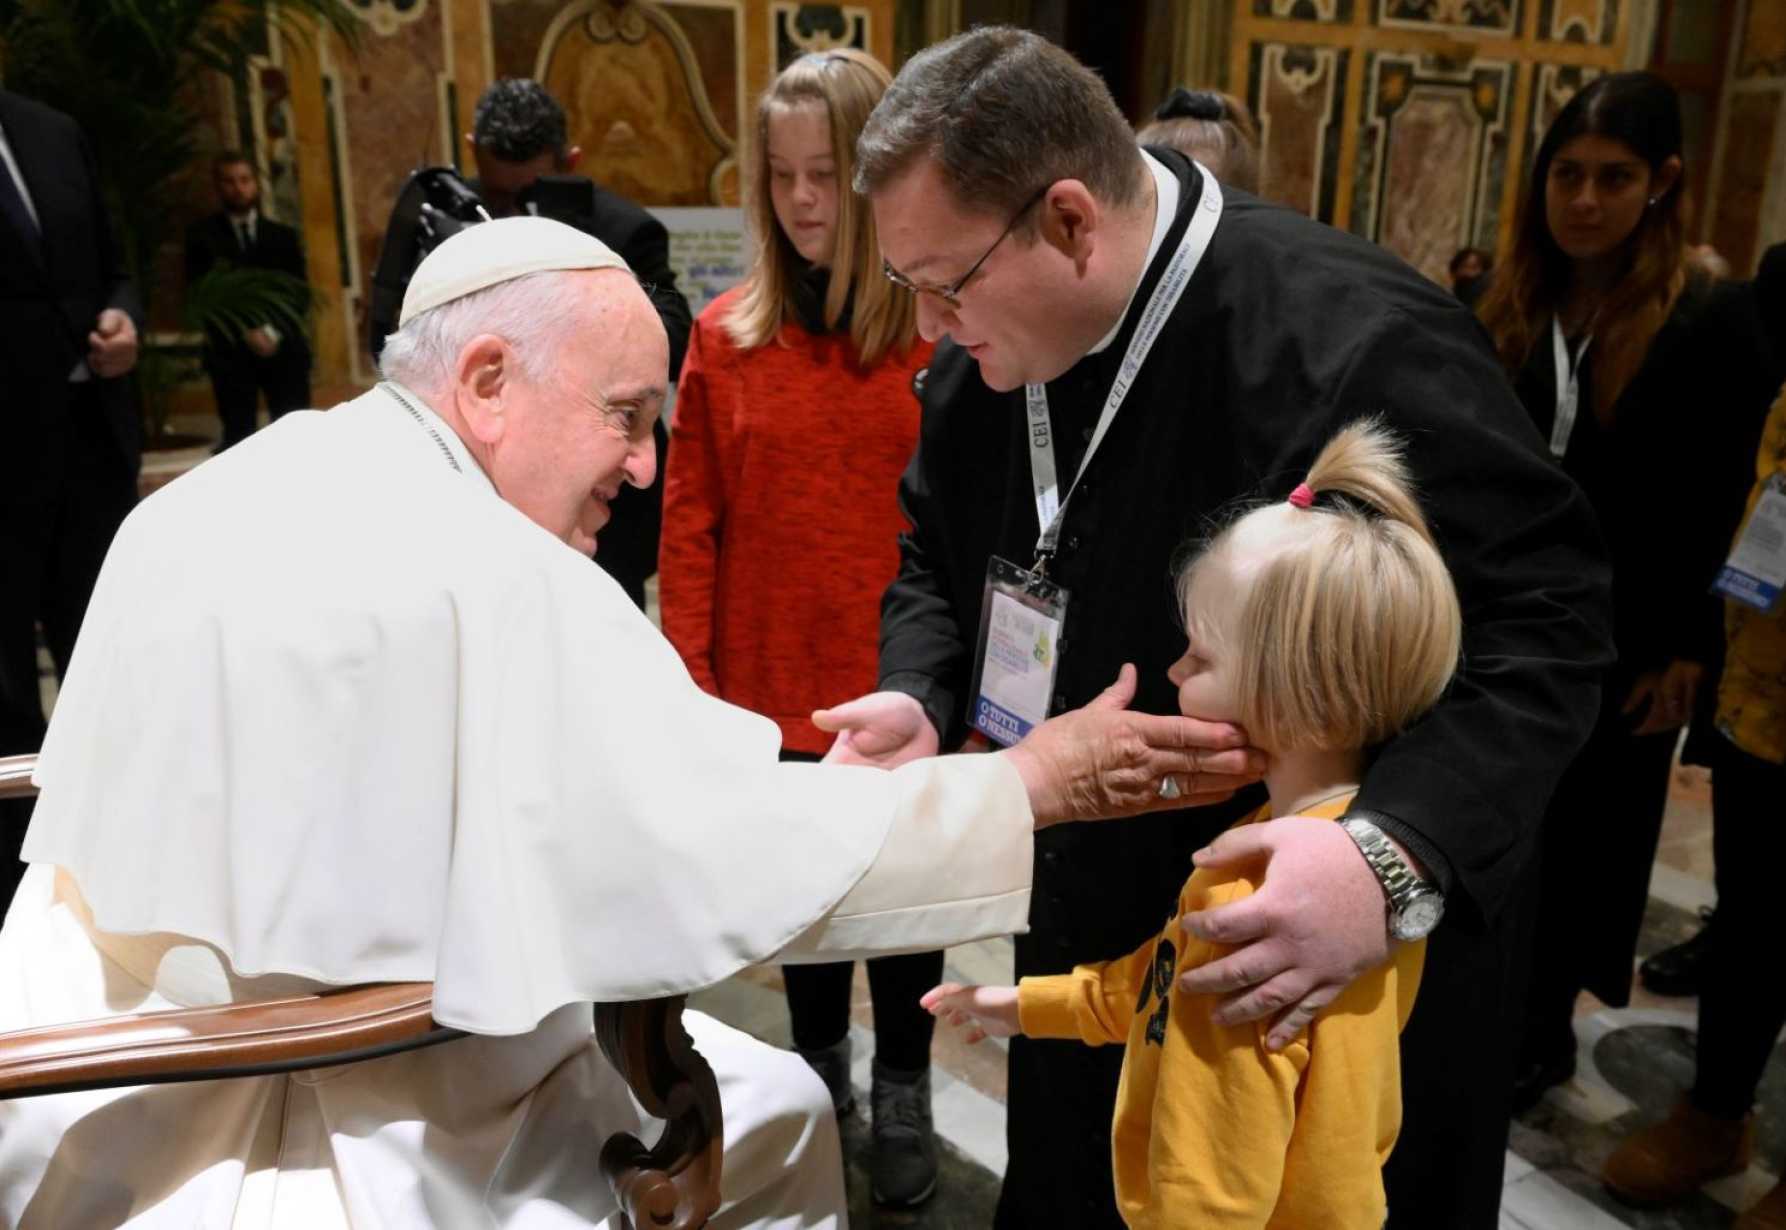 Being 'inclusive' of those with disabilities means valuing them, pope says USCCB